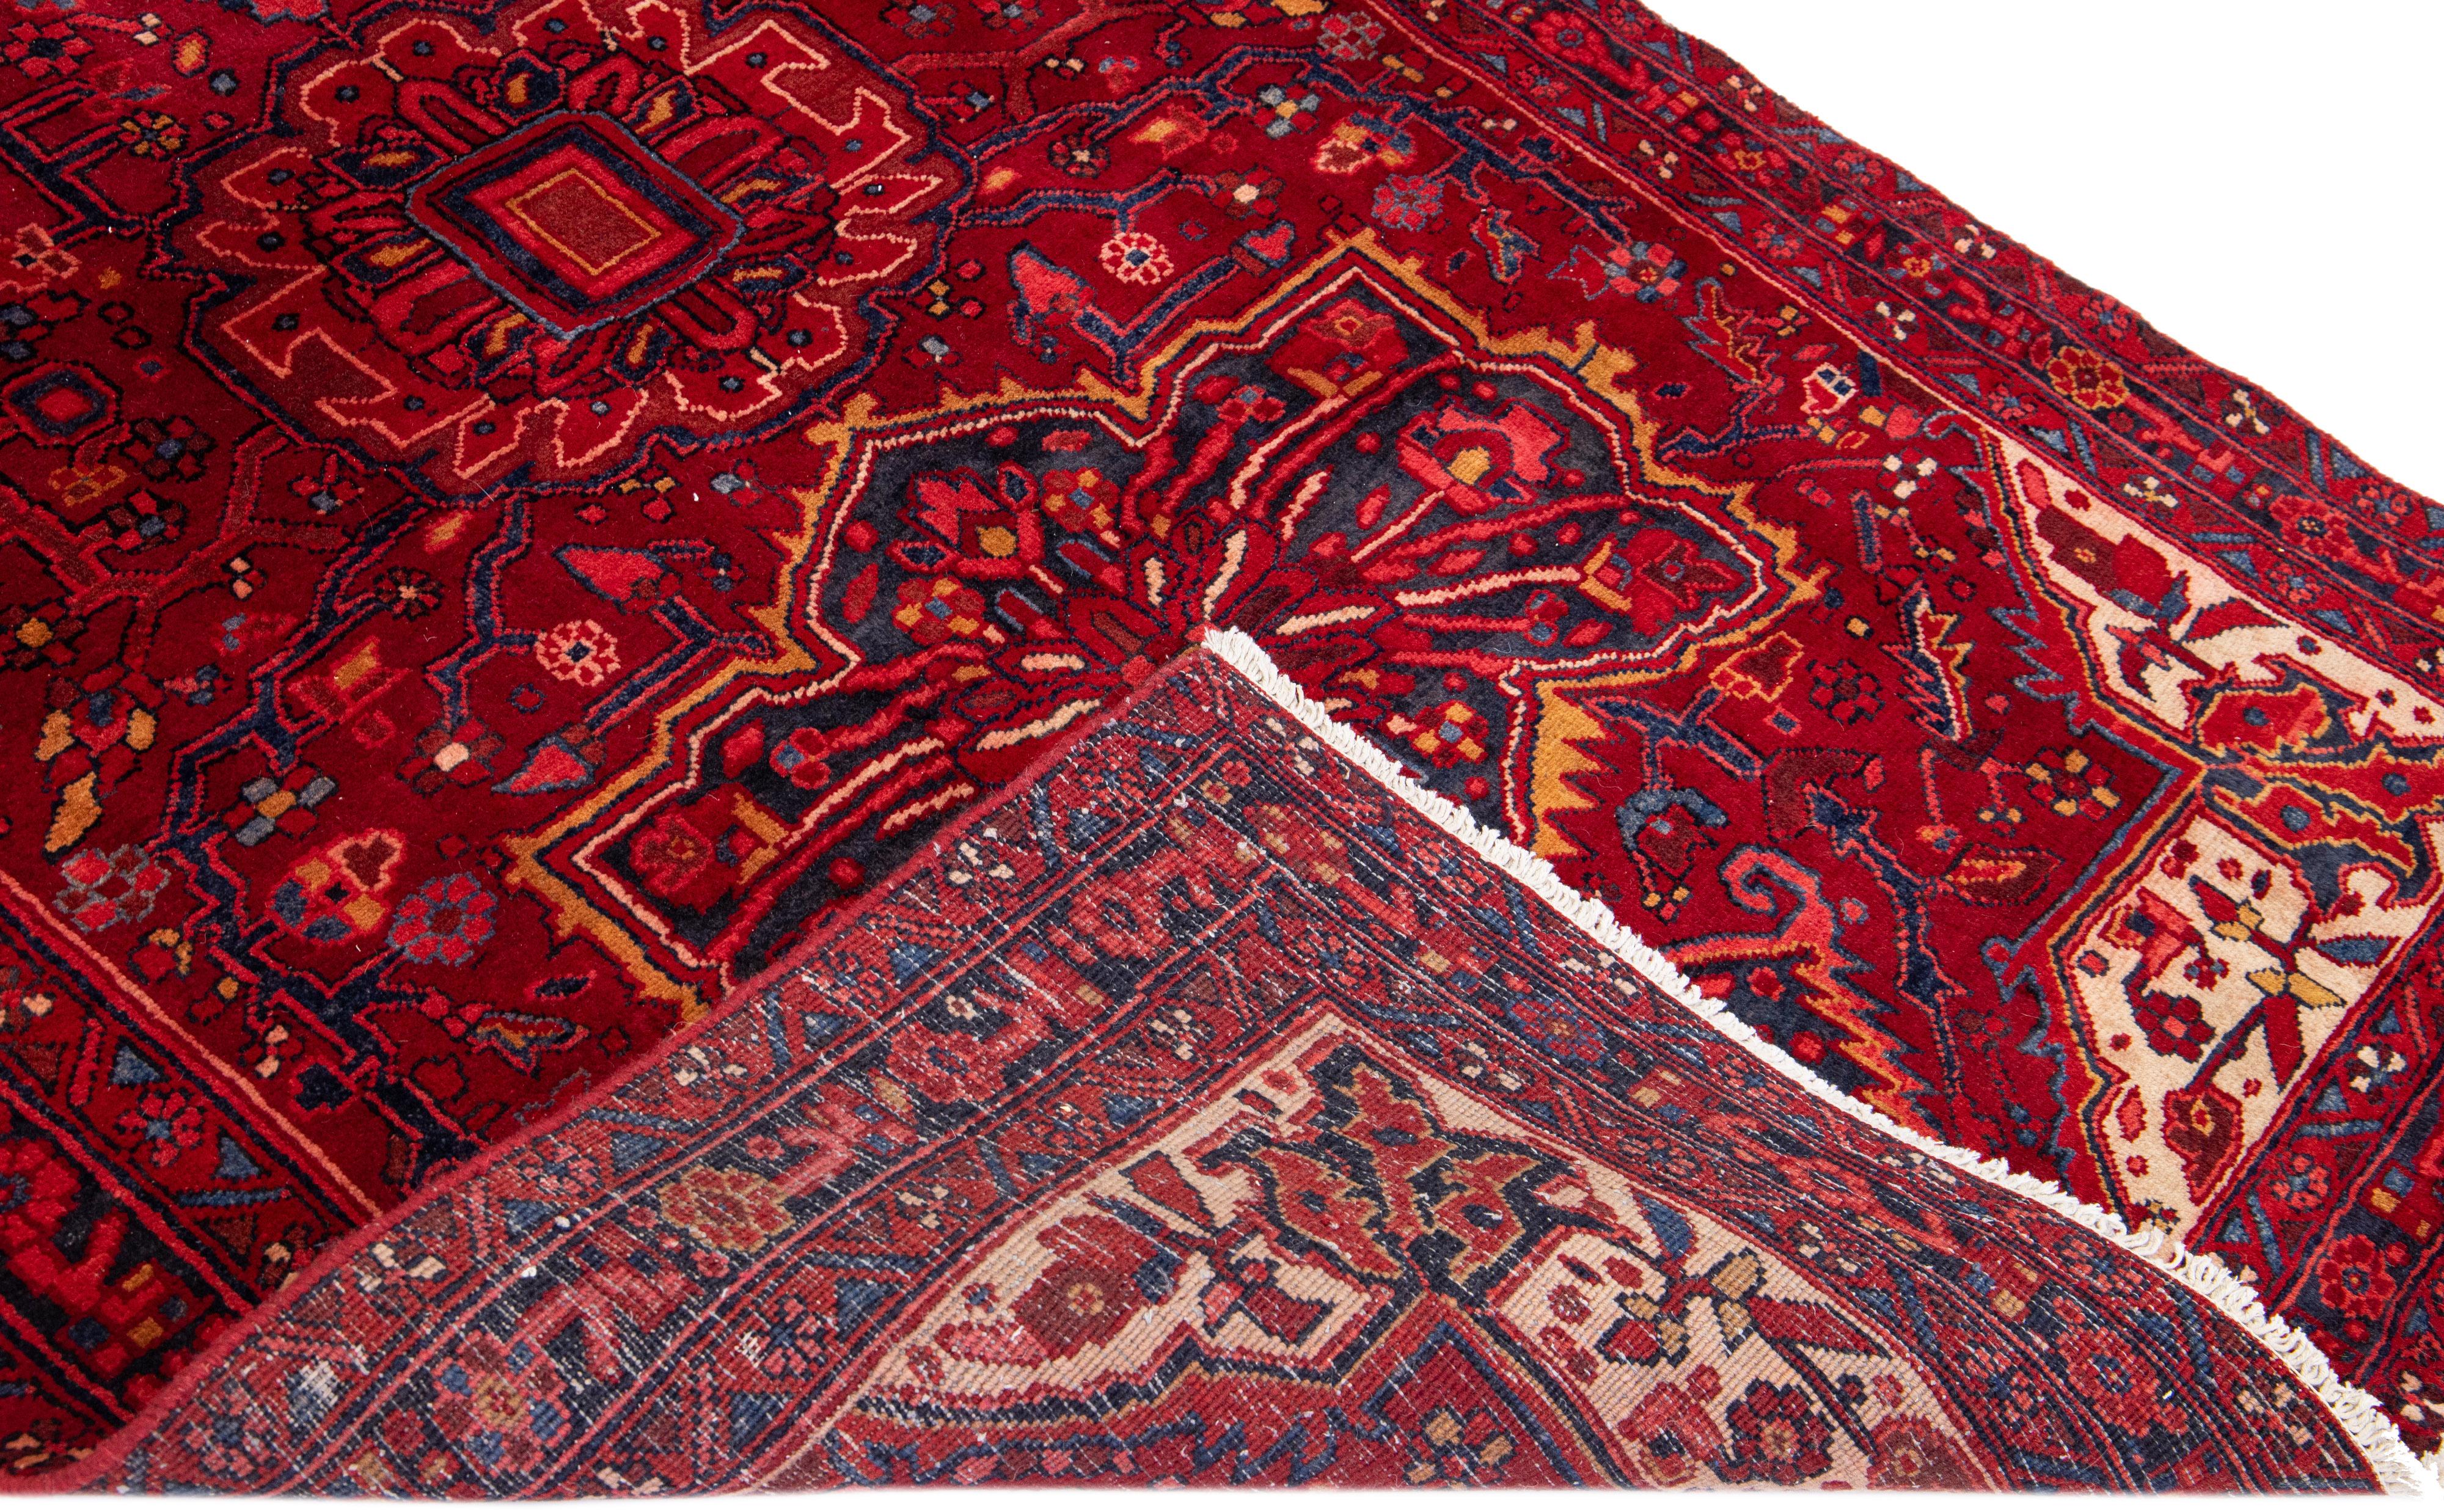 Beautiful antique Heriz hand-knotted wool rug with a red field. This Heriz rug has a navy blue frame and multi-color accents in a gorgeous all-over medallion floral design.

This rug measures: 5'1